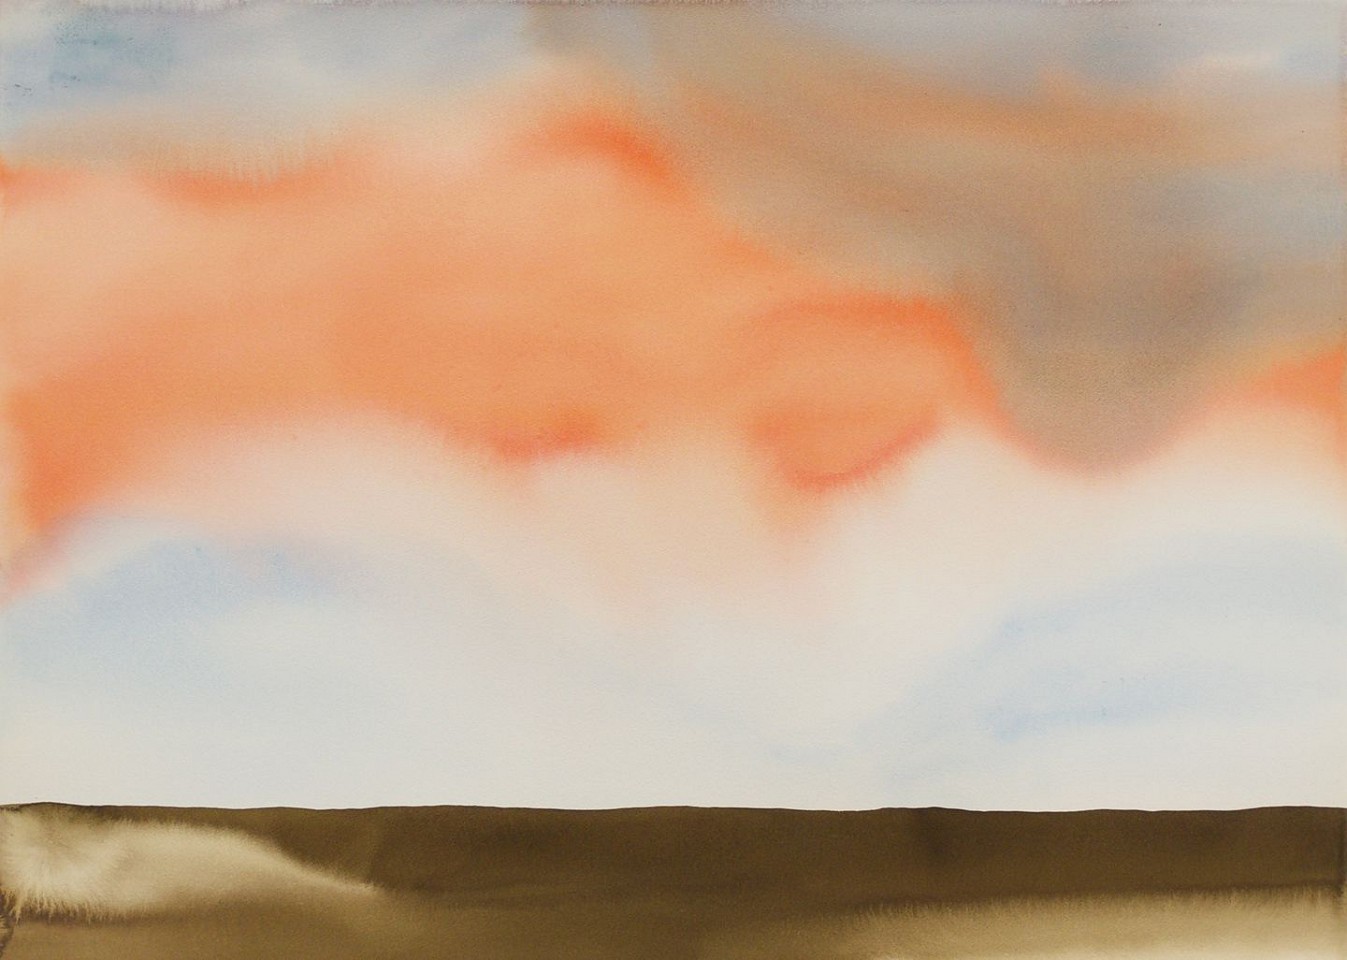 Shawn Dulaney
Boundary III, 2023
DULAN1175
watercolor on paper, 30 x 41 1/2 inches